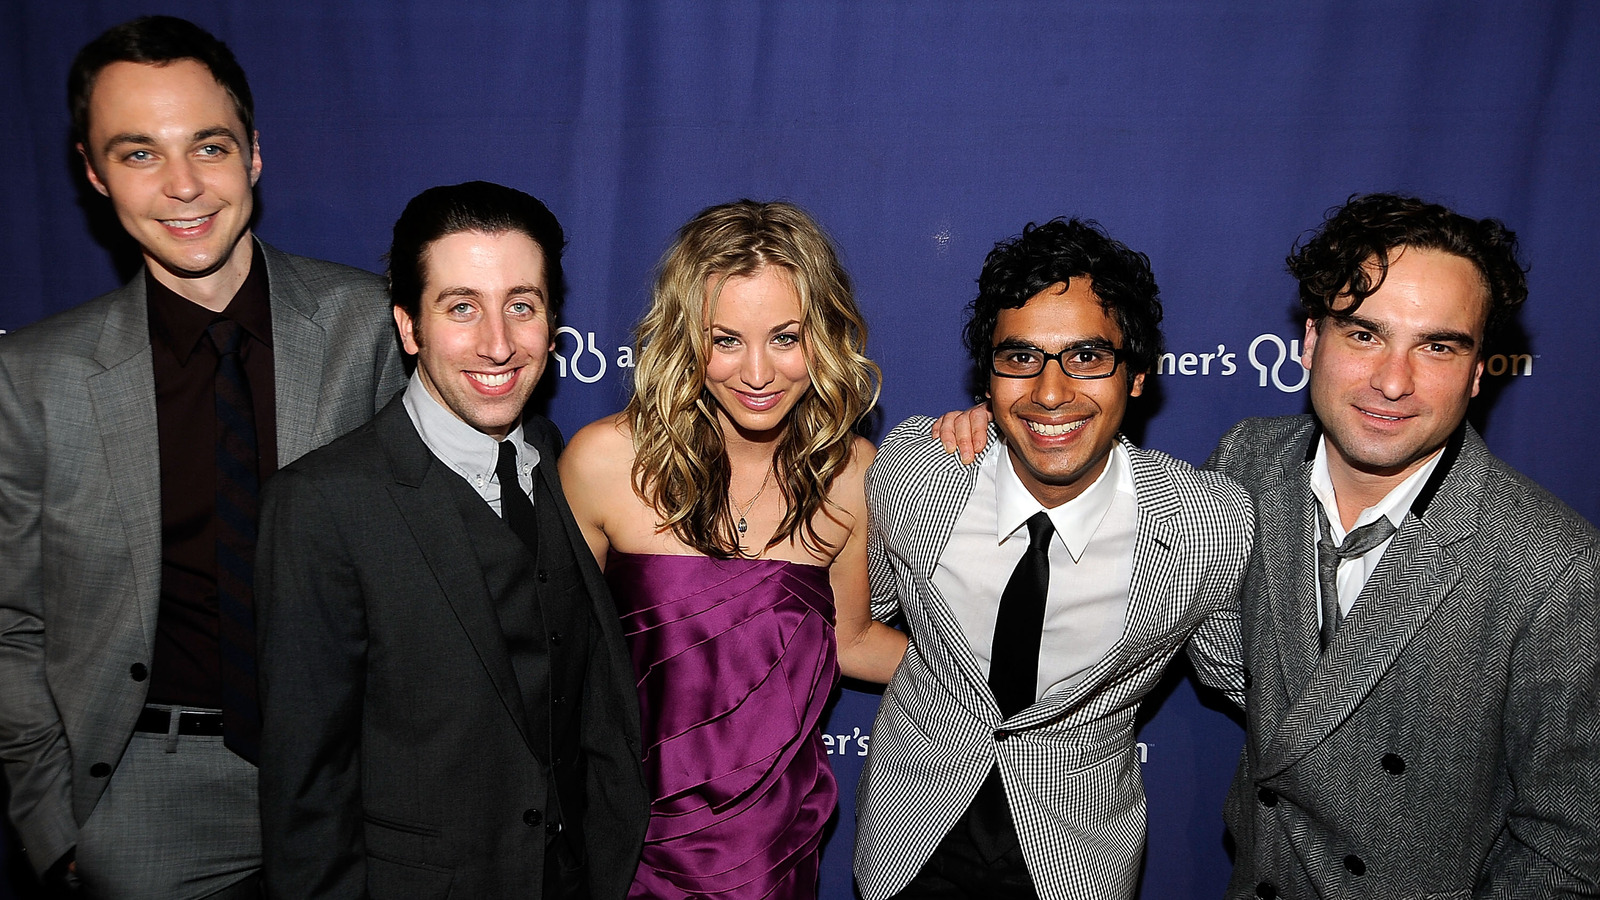 After The Big Bang Theory Ends, What's Next for the Cast?